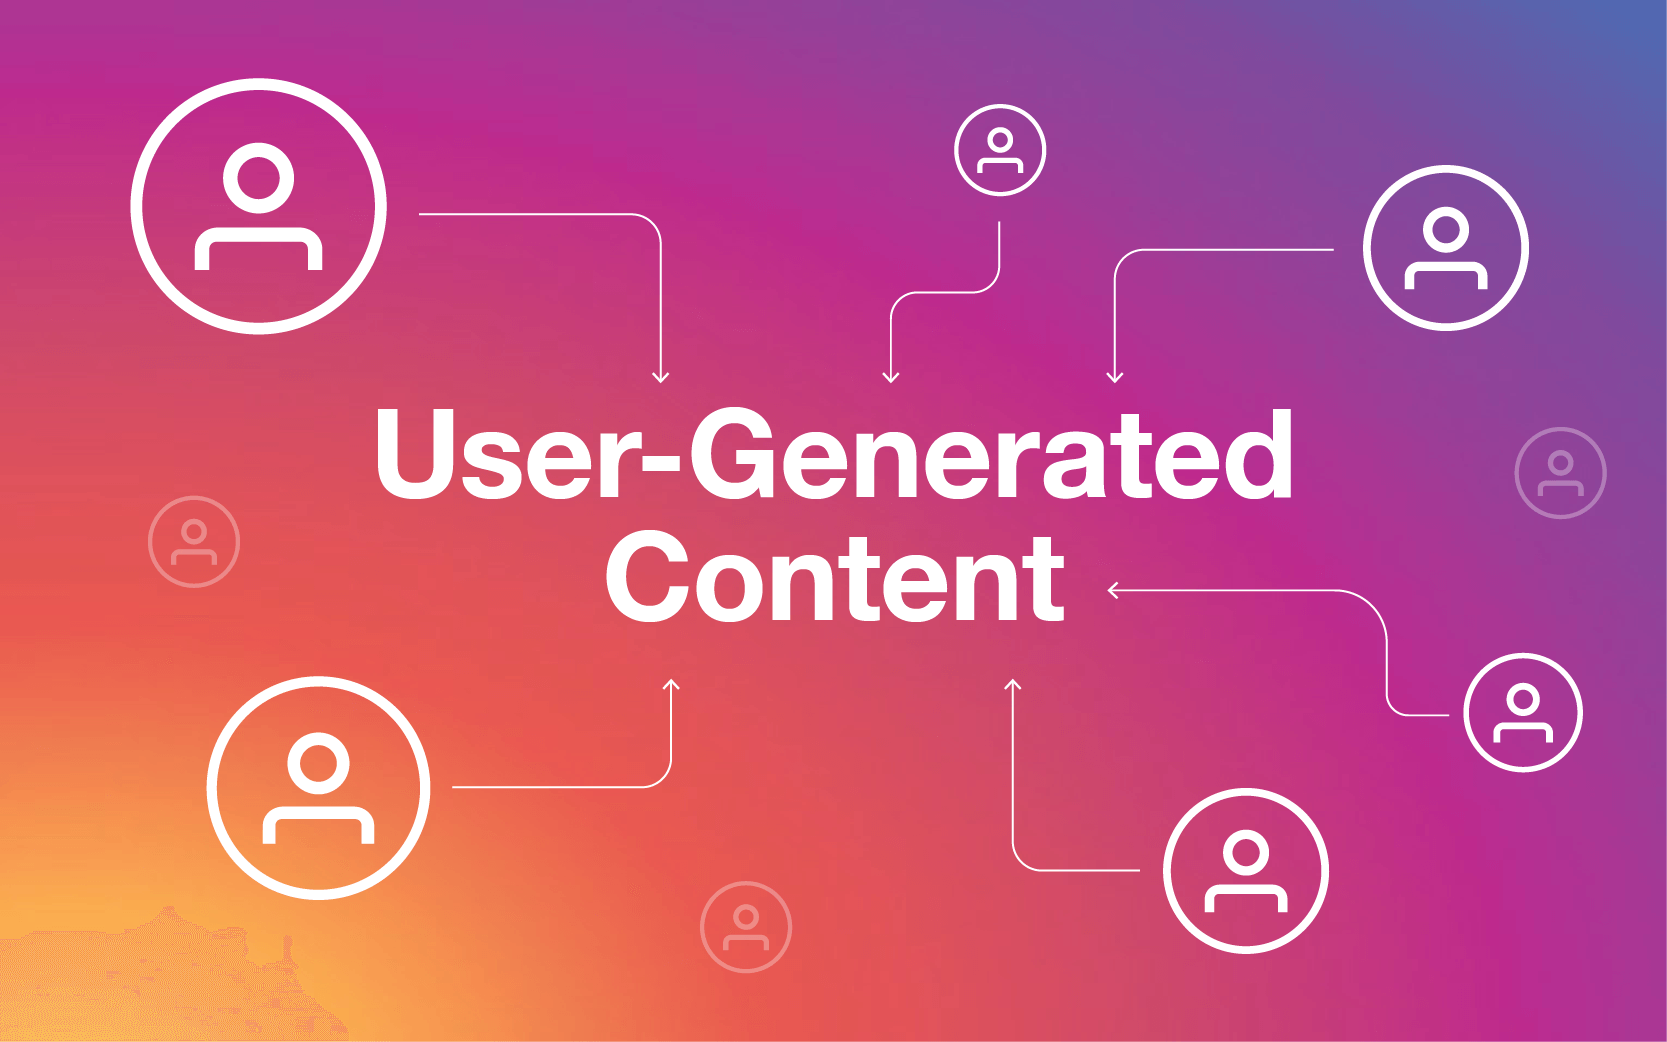 How to boost engagement with User Generated Content on Instagram?